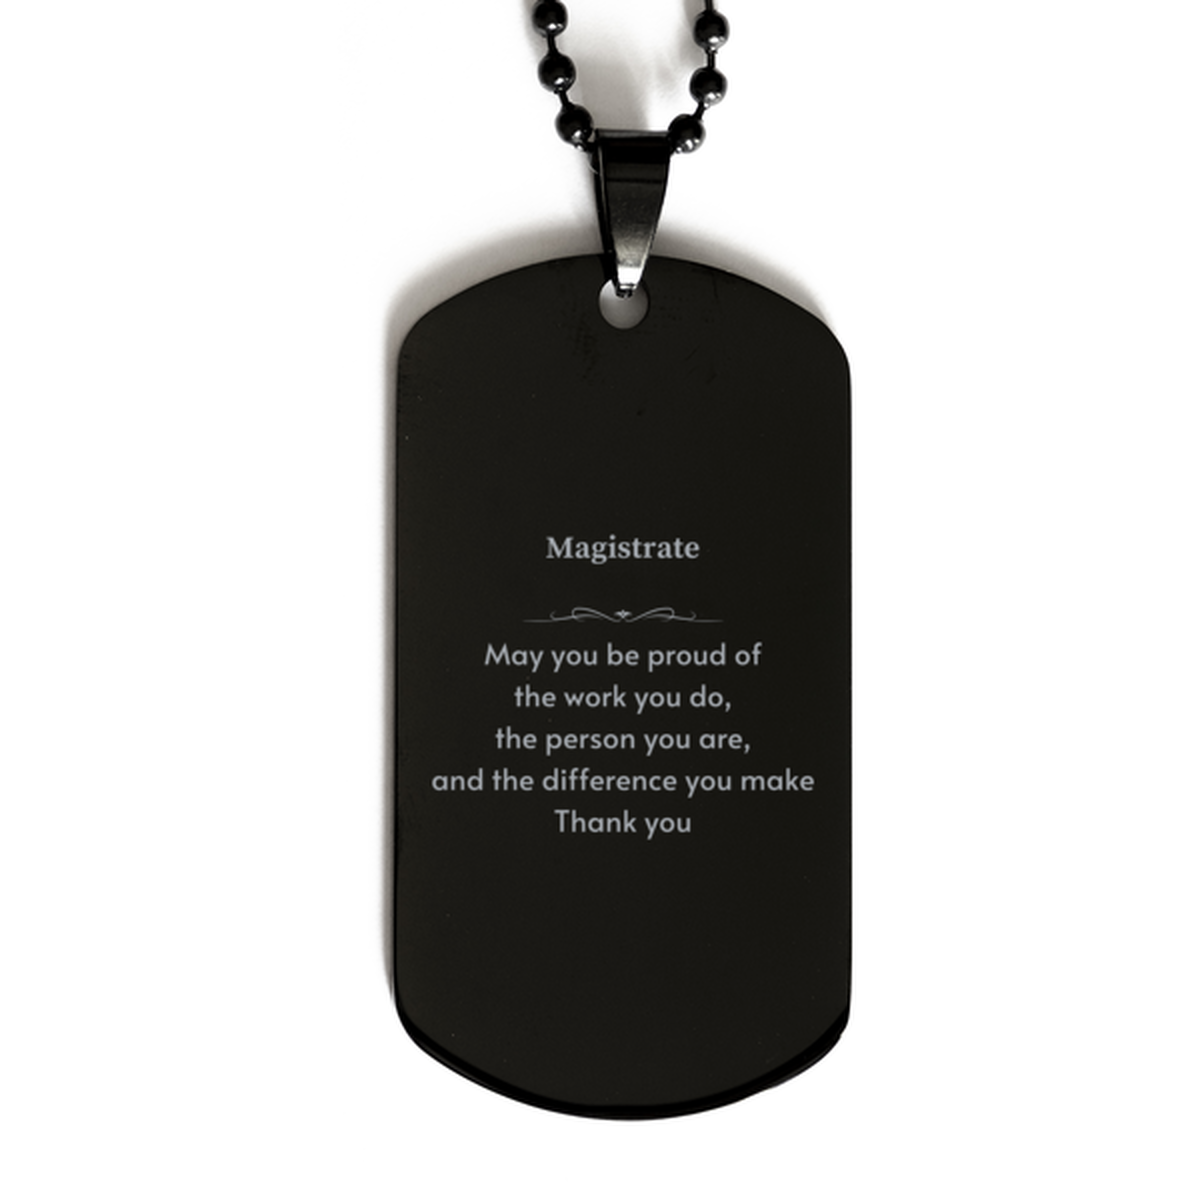 Heartwarming Black Dog Tag Retirement Coworkers Gifts for Magistrate, Magistrate May You be proud of the work you do, the person you are Gifts for Boss Men Women Friends